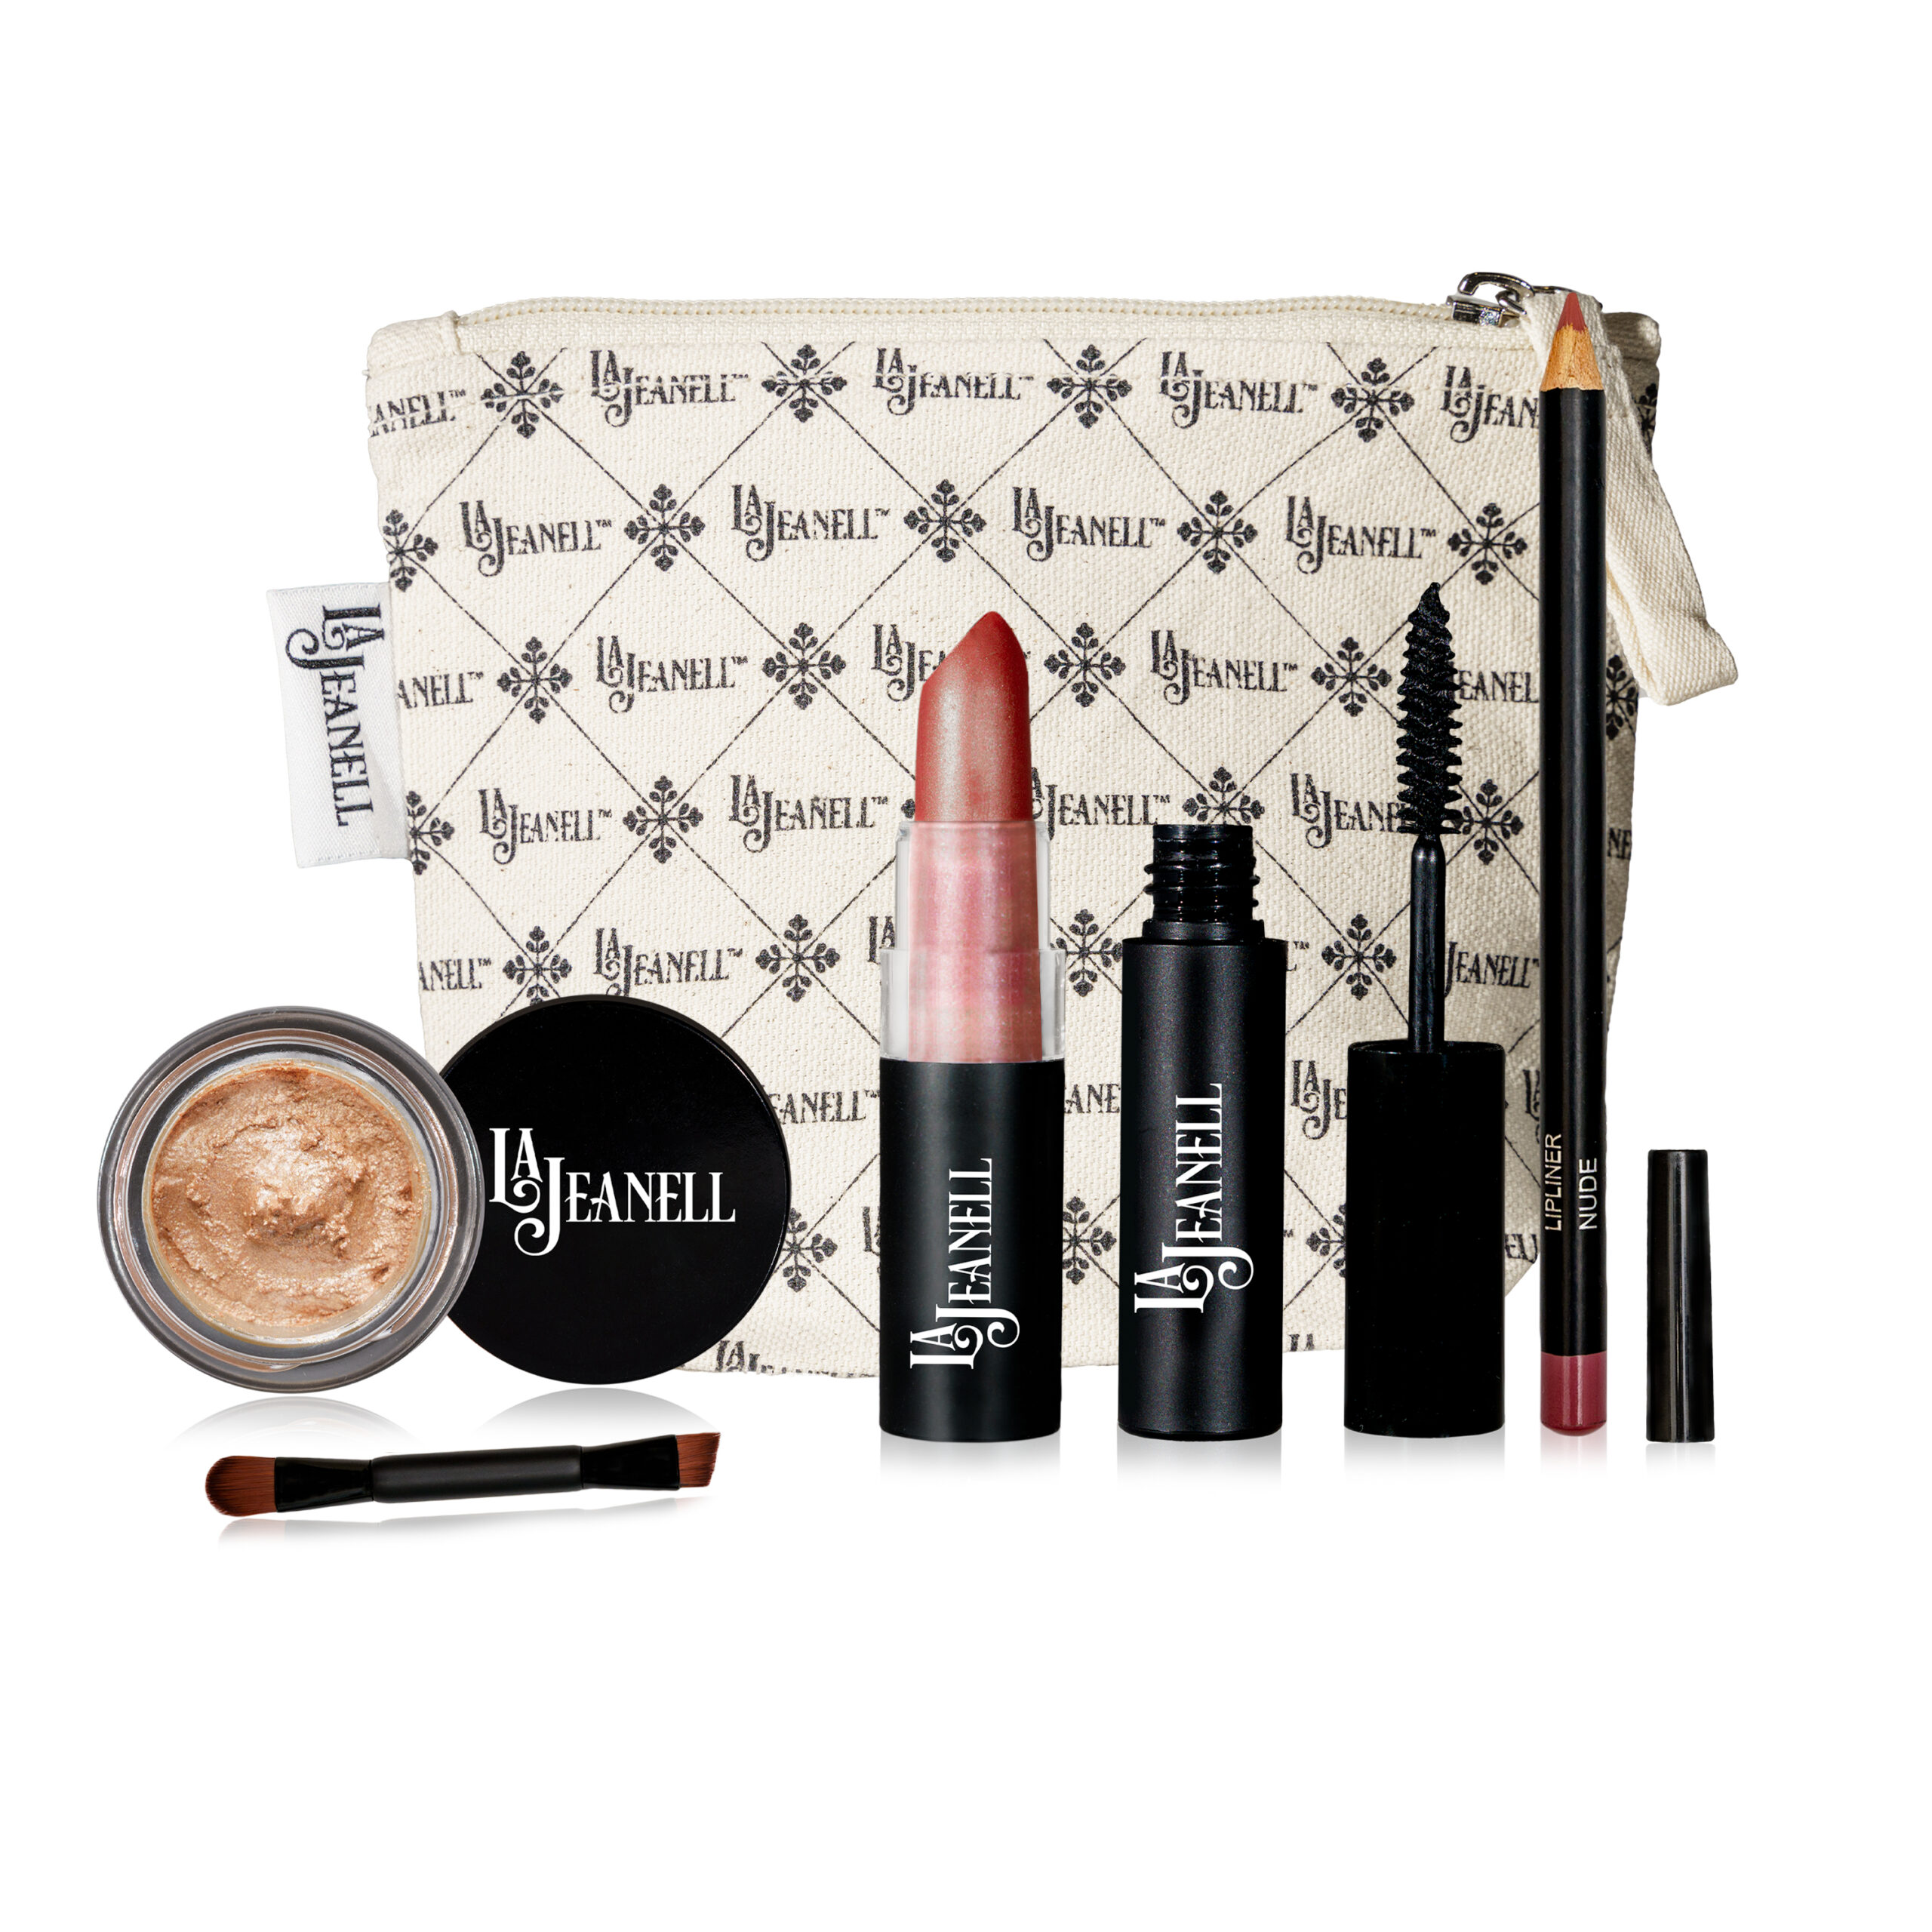 LaJeanell’s Essential Makeup Limited Edition Set